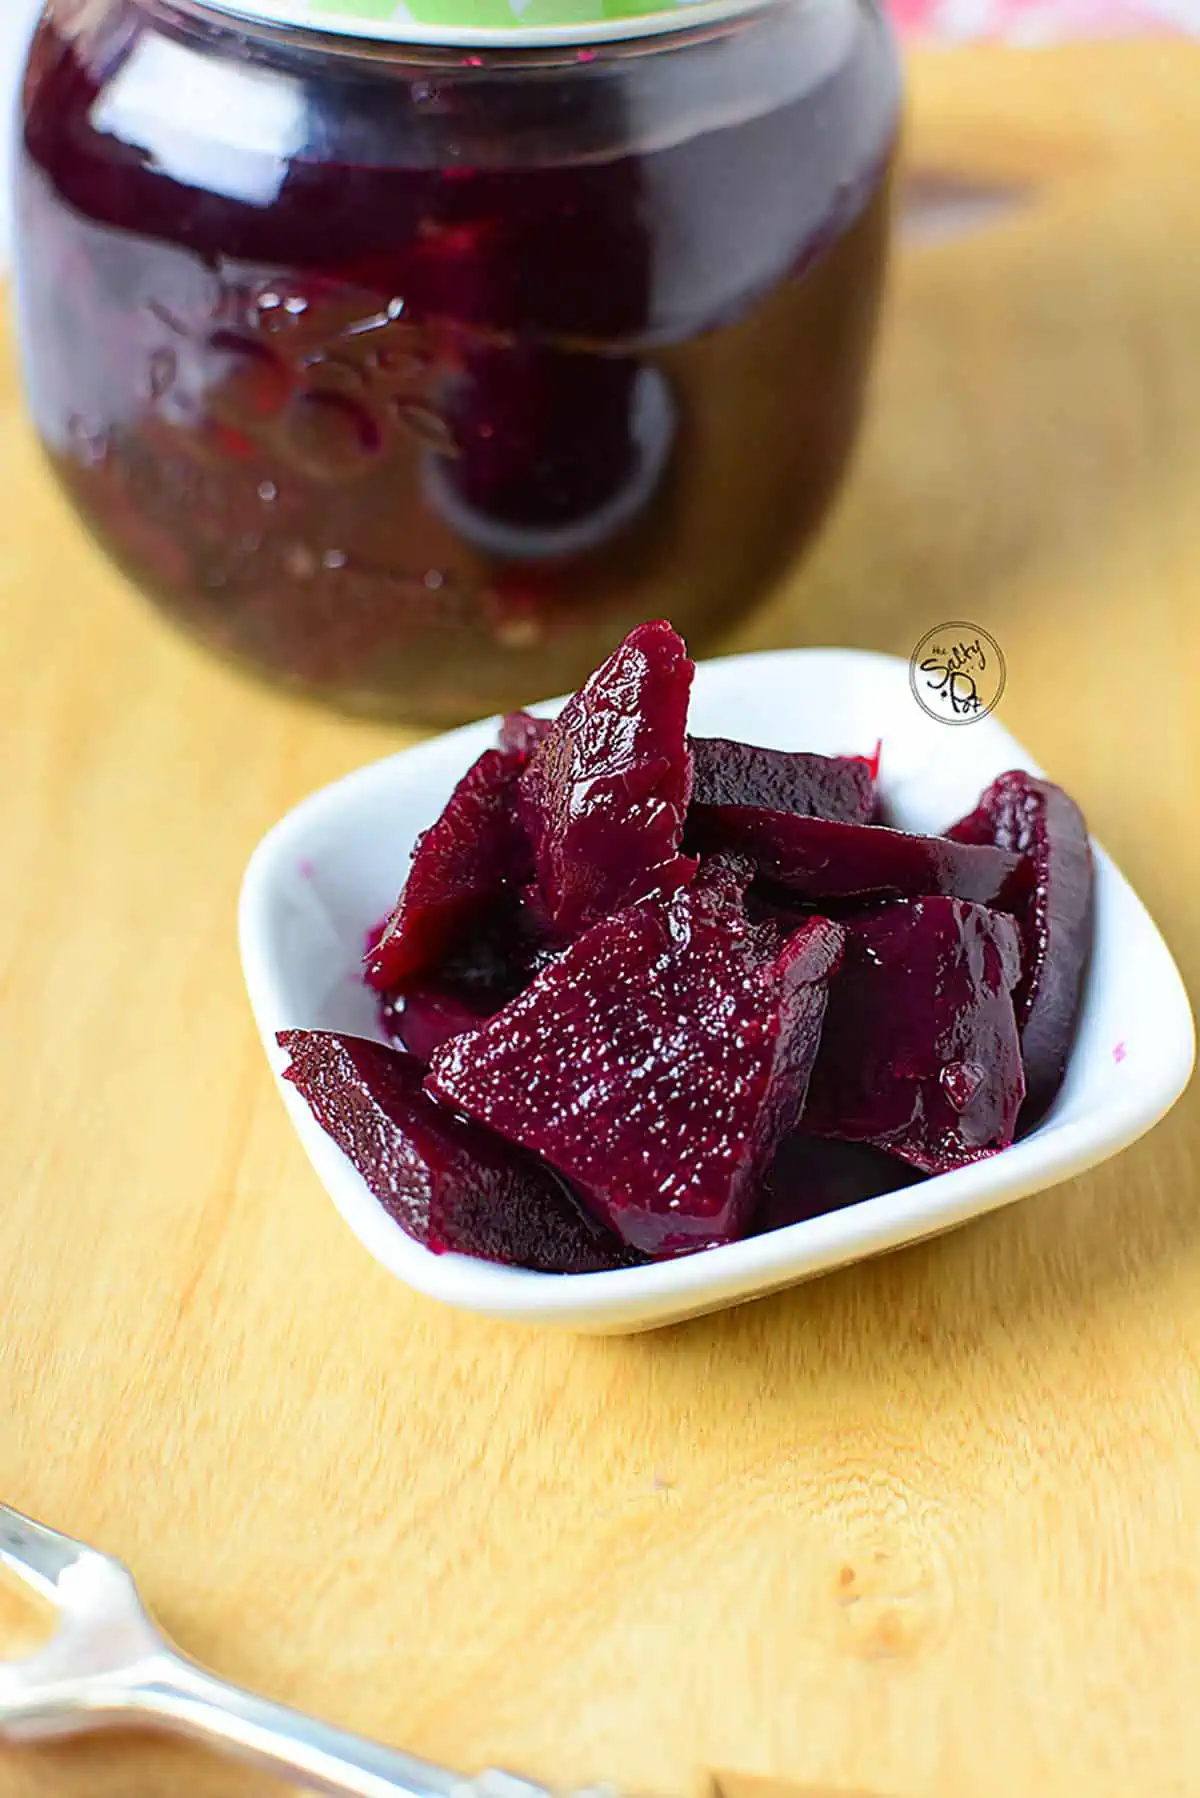 Refrigerator pickled beets in a white serving dish with a jar in the upper left background.